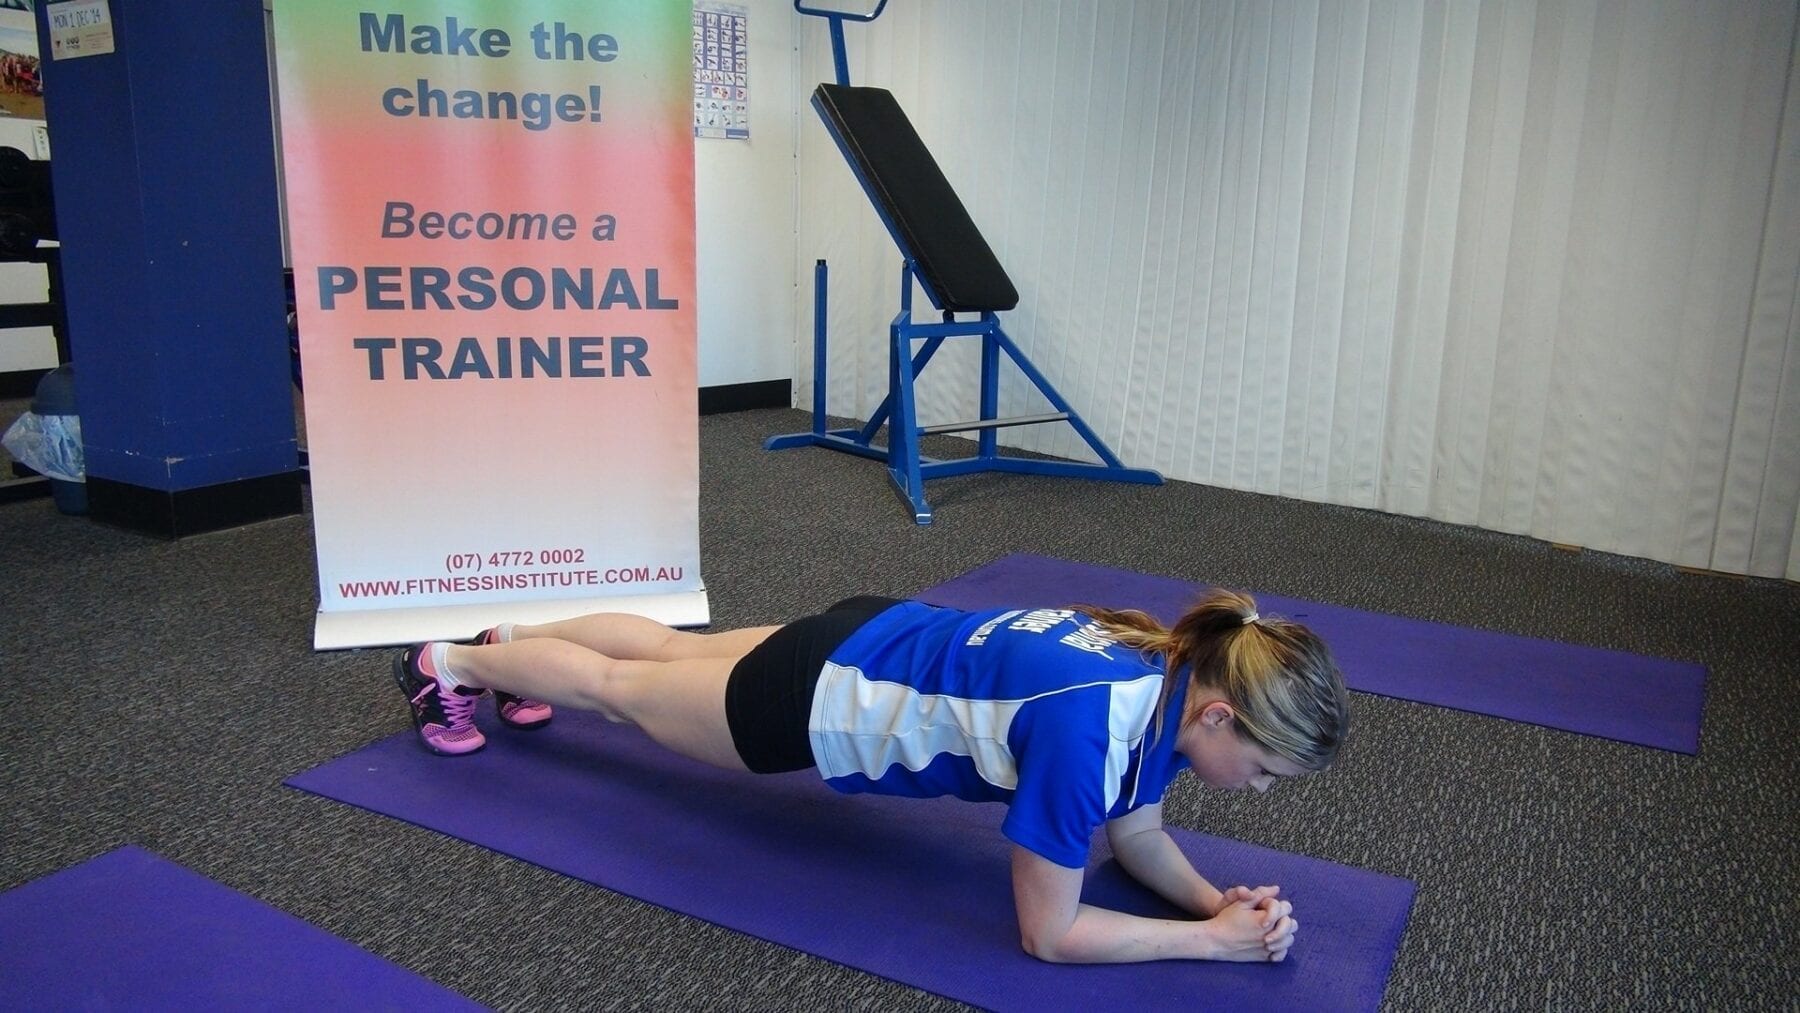 Fitness Institute Hover/Plank